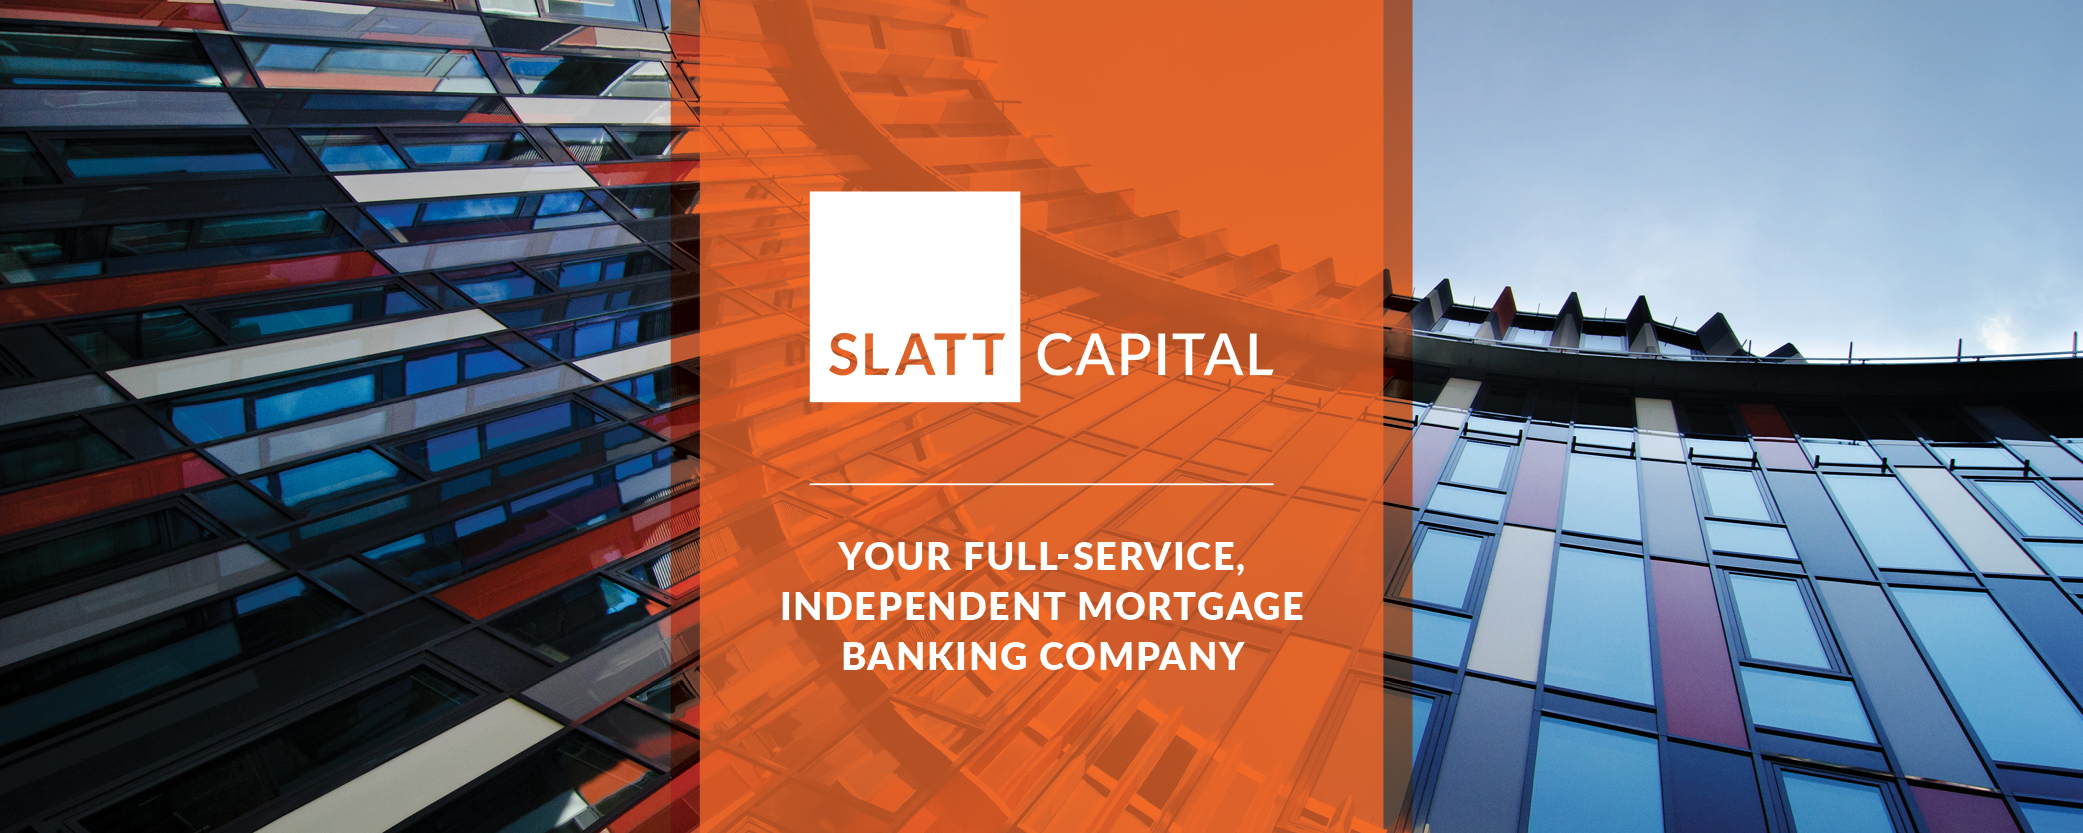 Slatt capital is your full-service, independent mortgage banking company